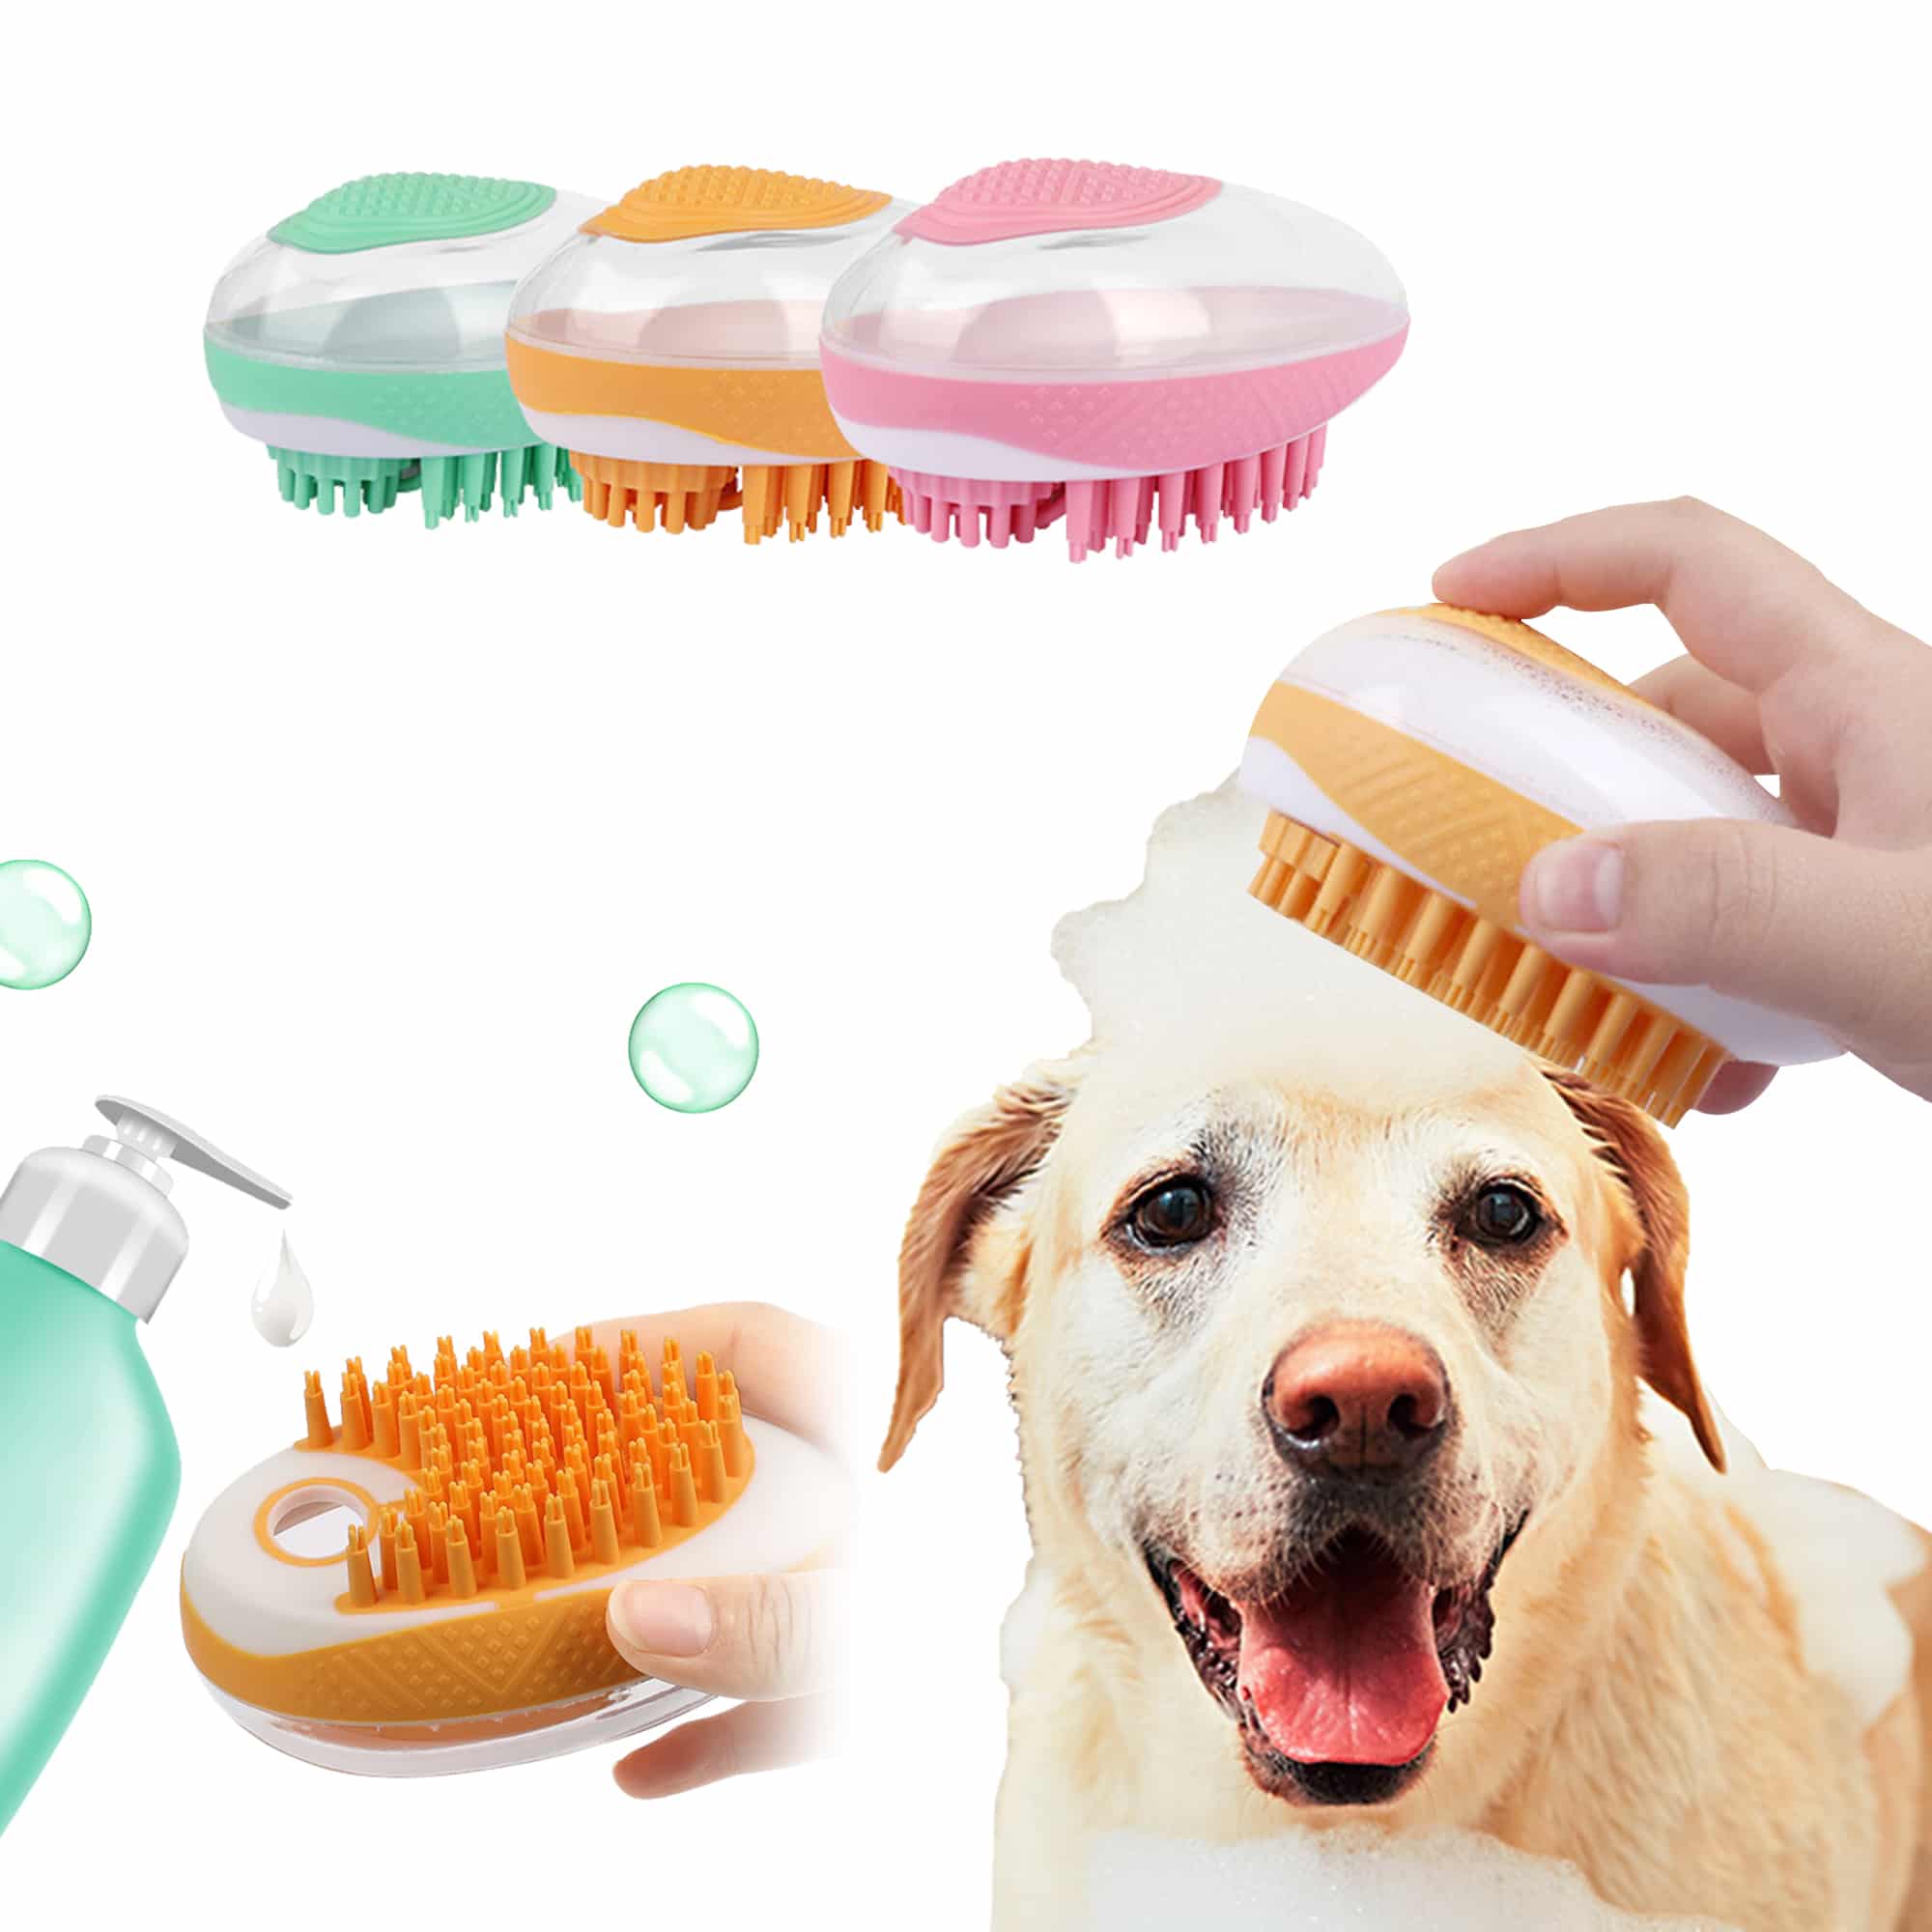 Harvey's Choice Soft Silicone Bath Brush: Give your furry friend a luxurious bathing experience. 2-in-1 design for bathing and grooming. Soft silicone material, shampoo saving, easy to clean, no-slip hand grip. Order now!